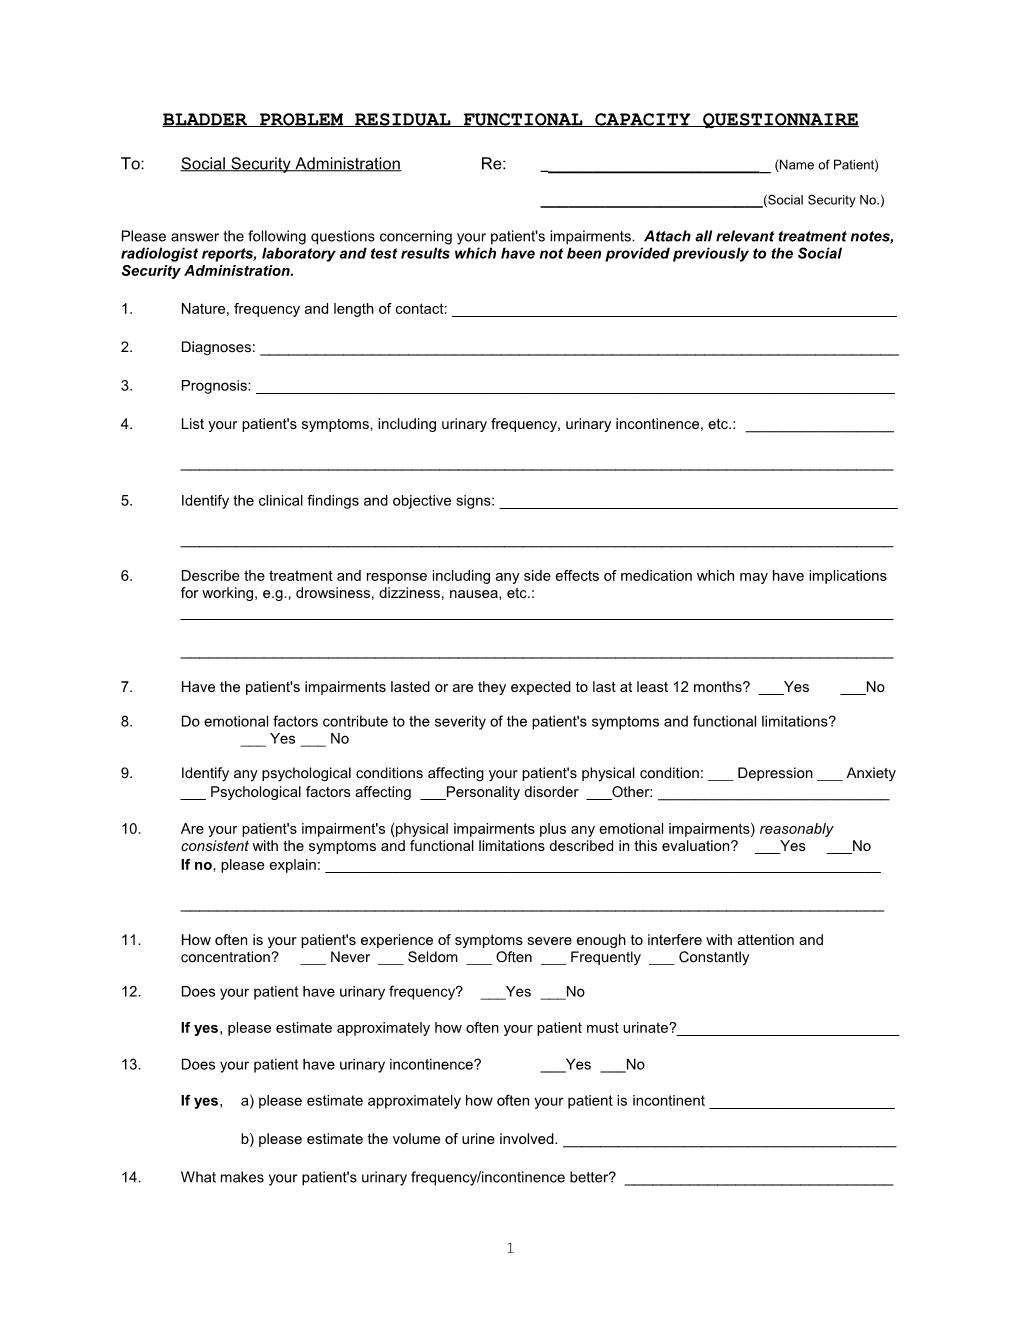 Bladder Problem Residual Functional Capacity Questionnaire